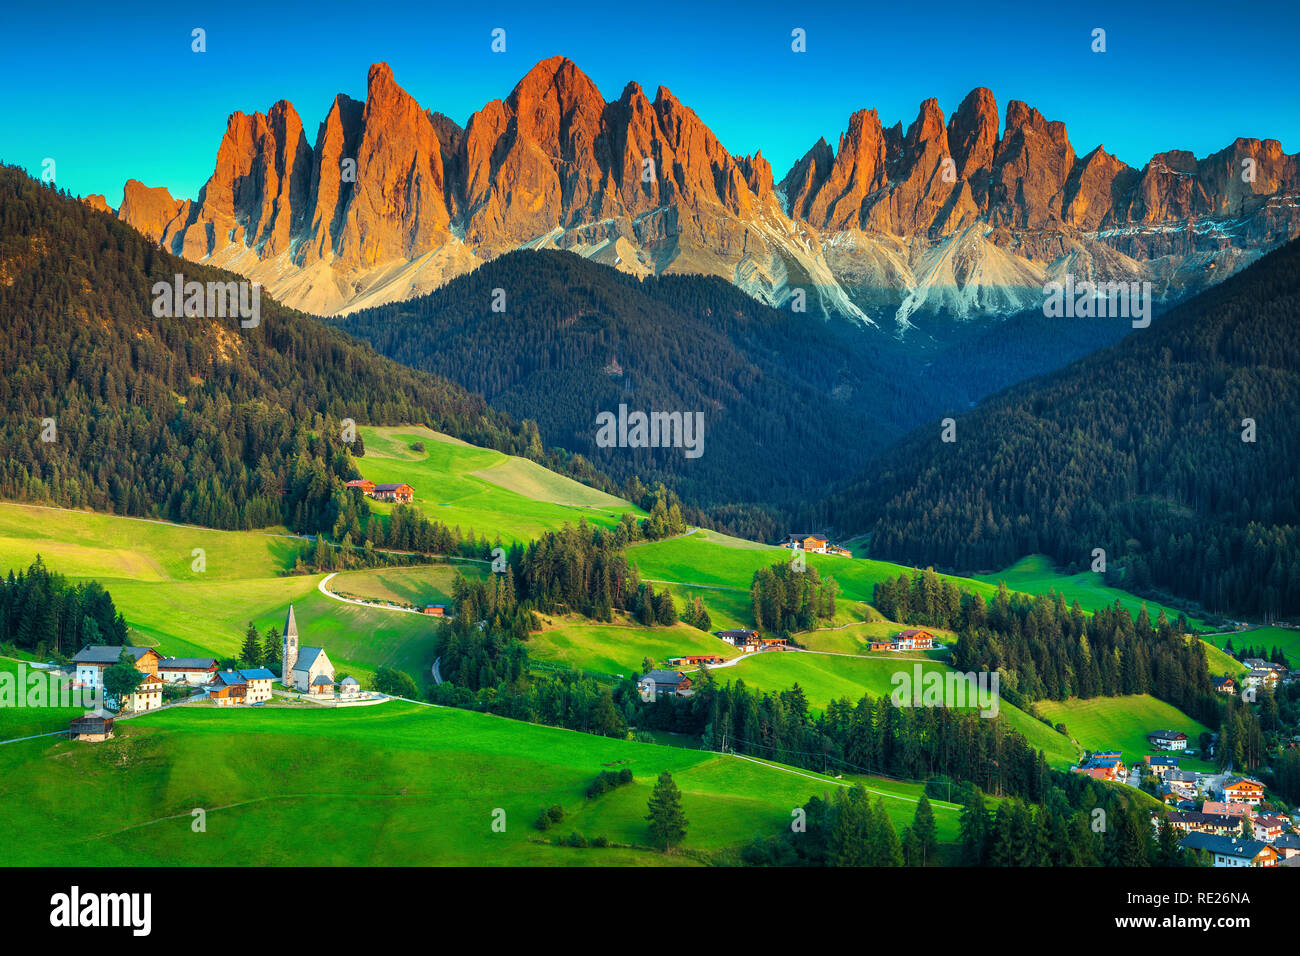 Admirable nature and photography place. Fantastic travel and hiking destination with high mountains and green fields, Santa Maddalena village, Funes v Stock Photo